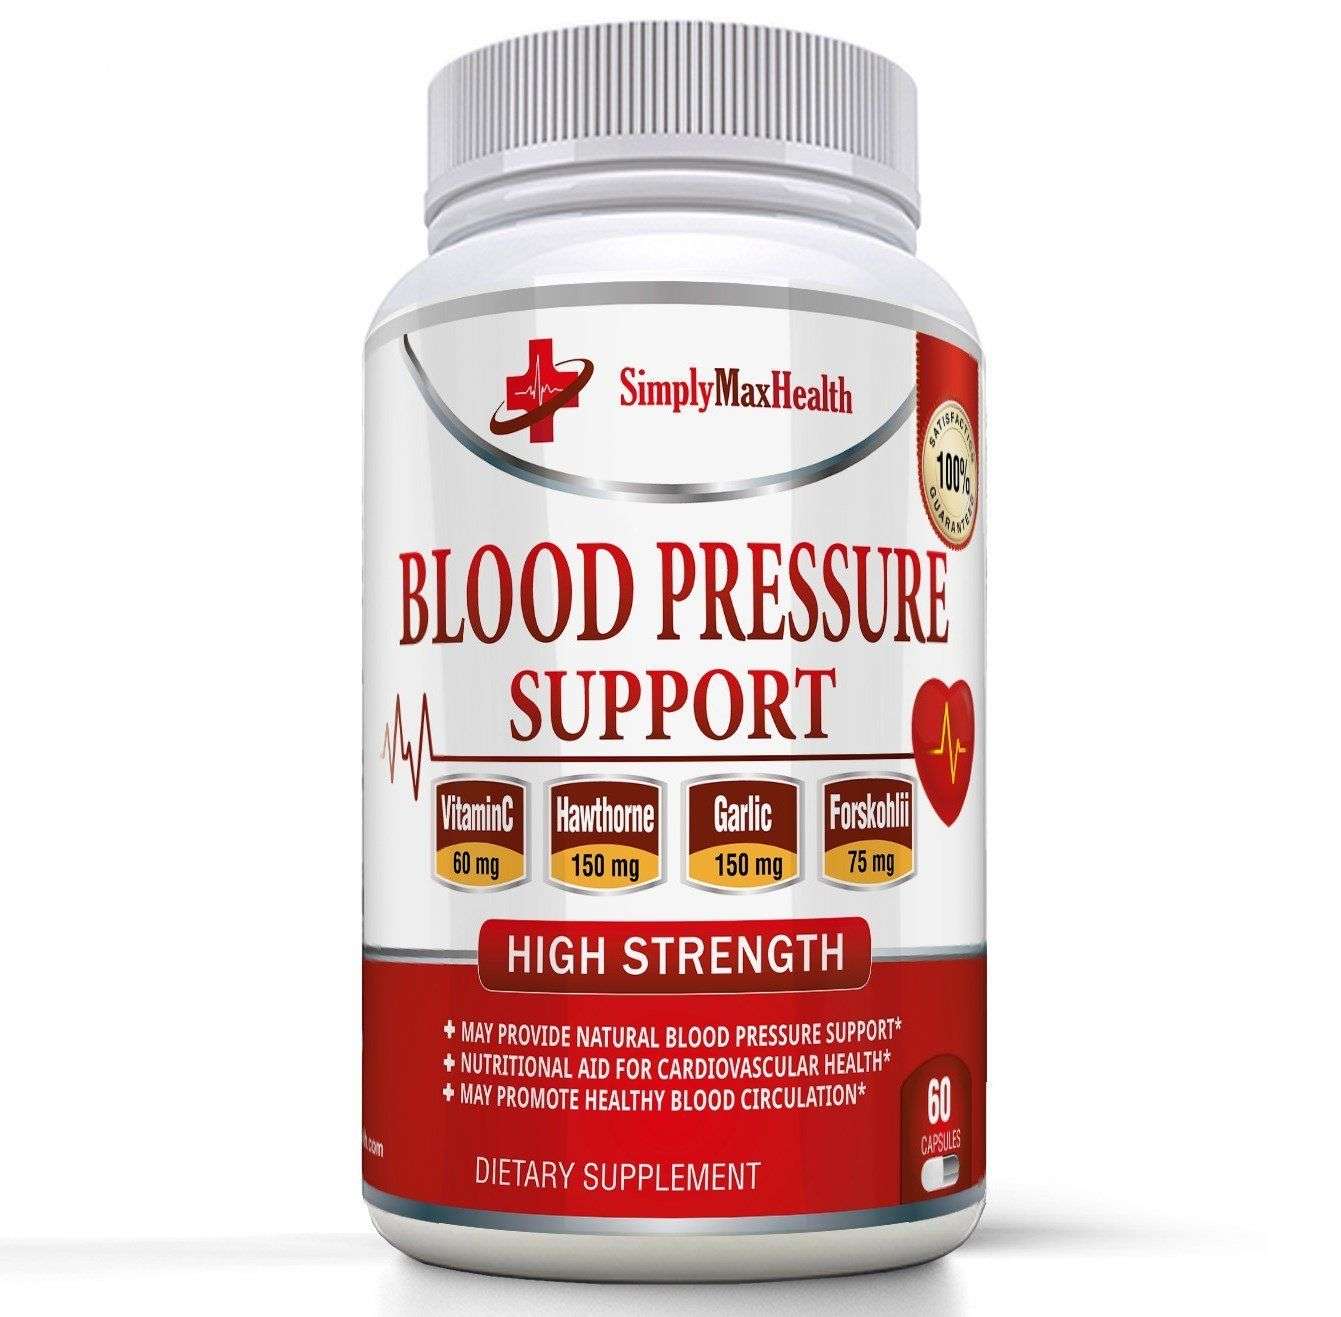 What Supplements Can I Take To Lower Blood Pressure